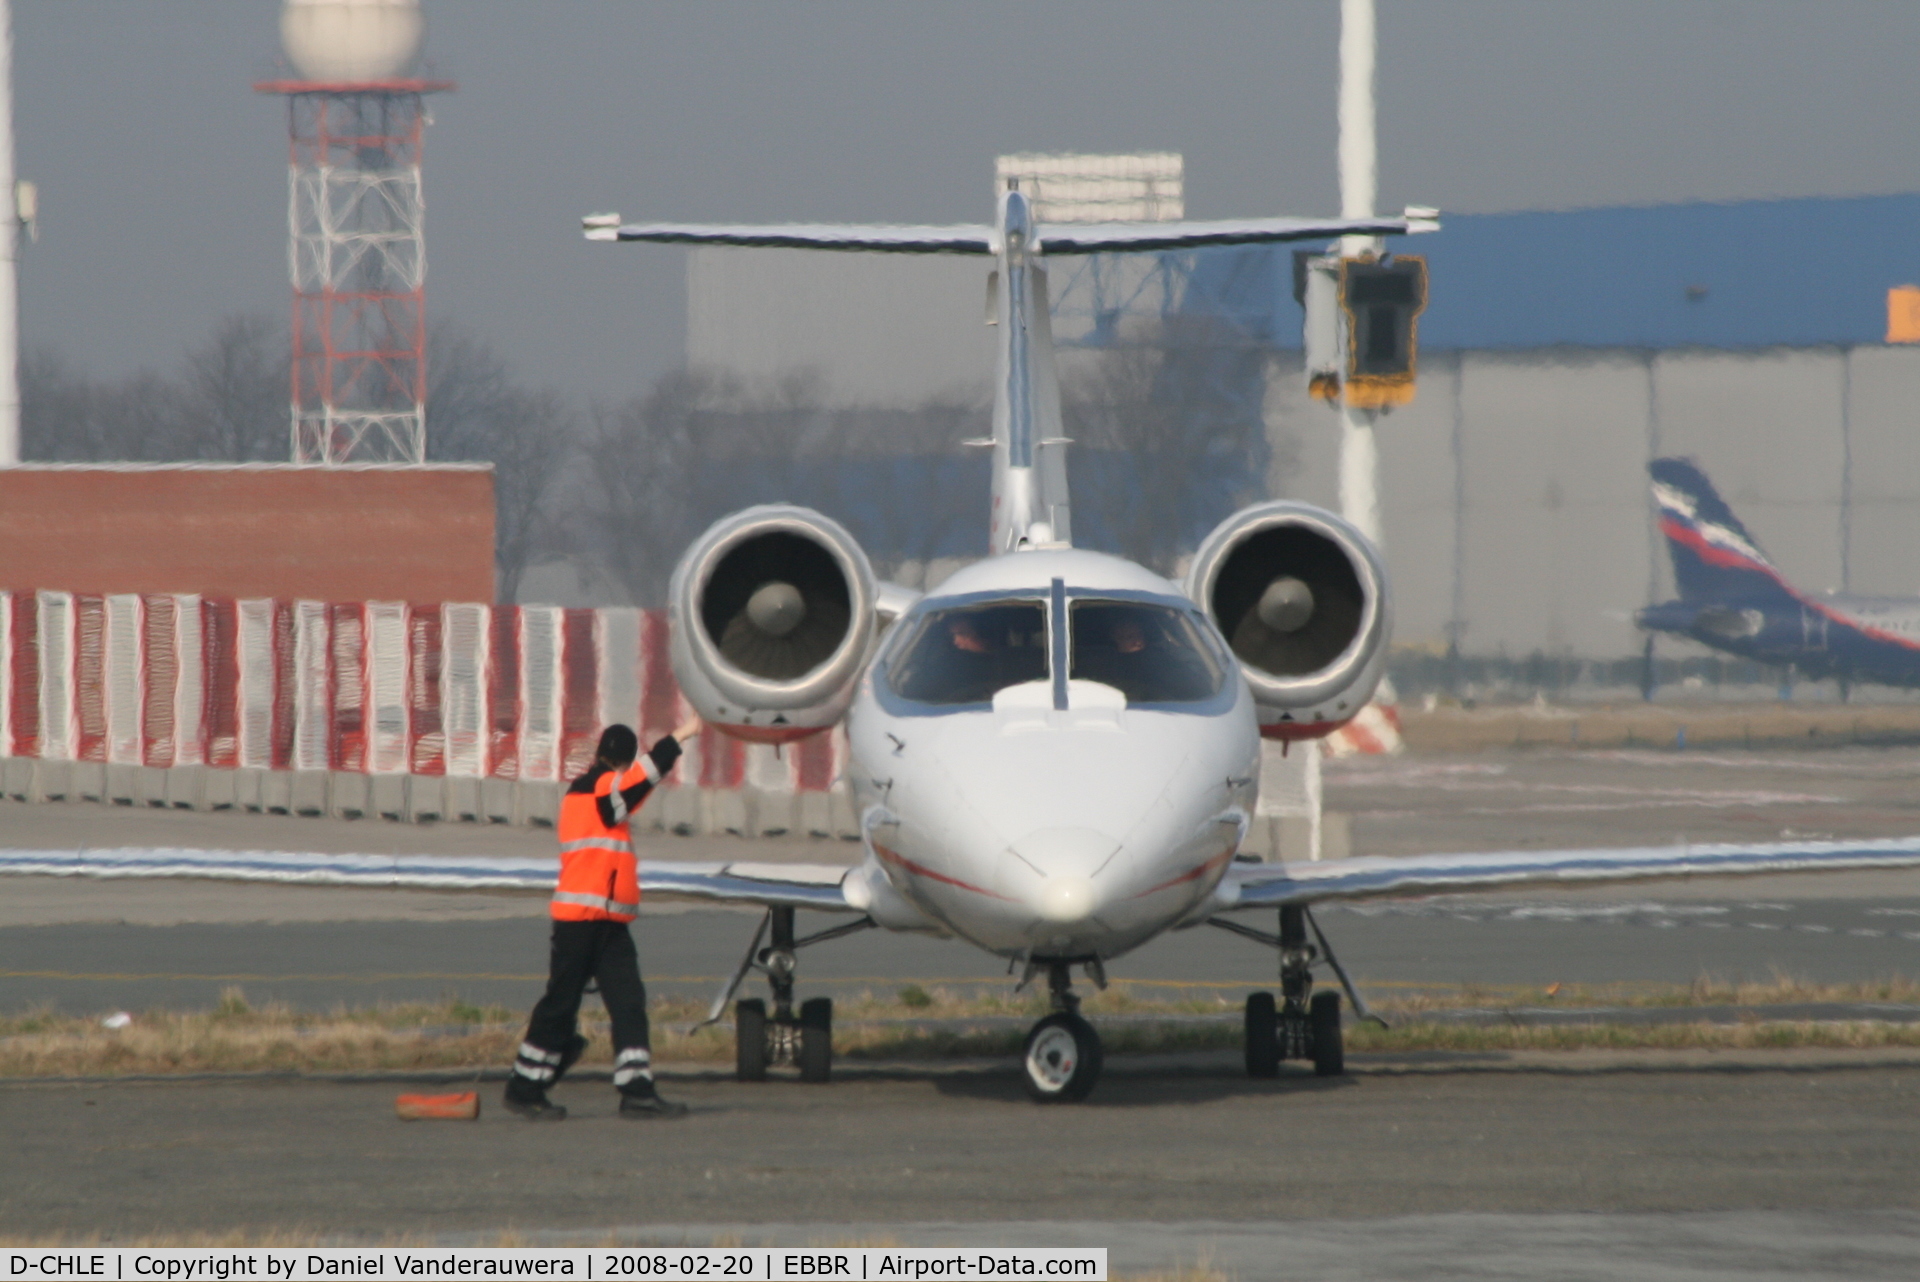 D-CHLE, 2001 Learjet 60 C/N 60-211, manoeuvring to park on General Aviation apron